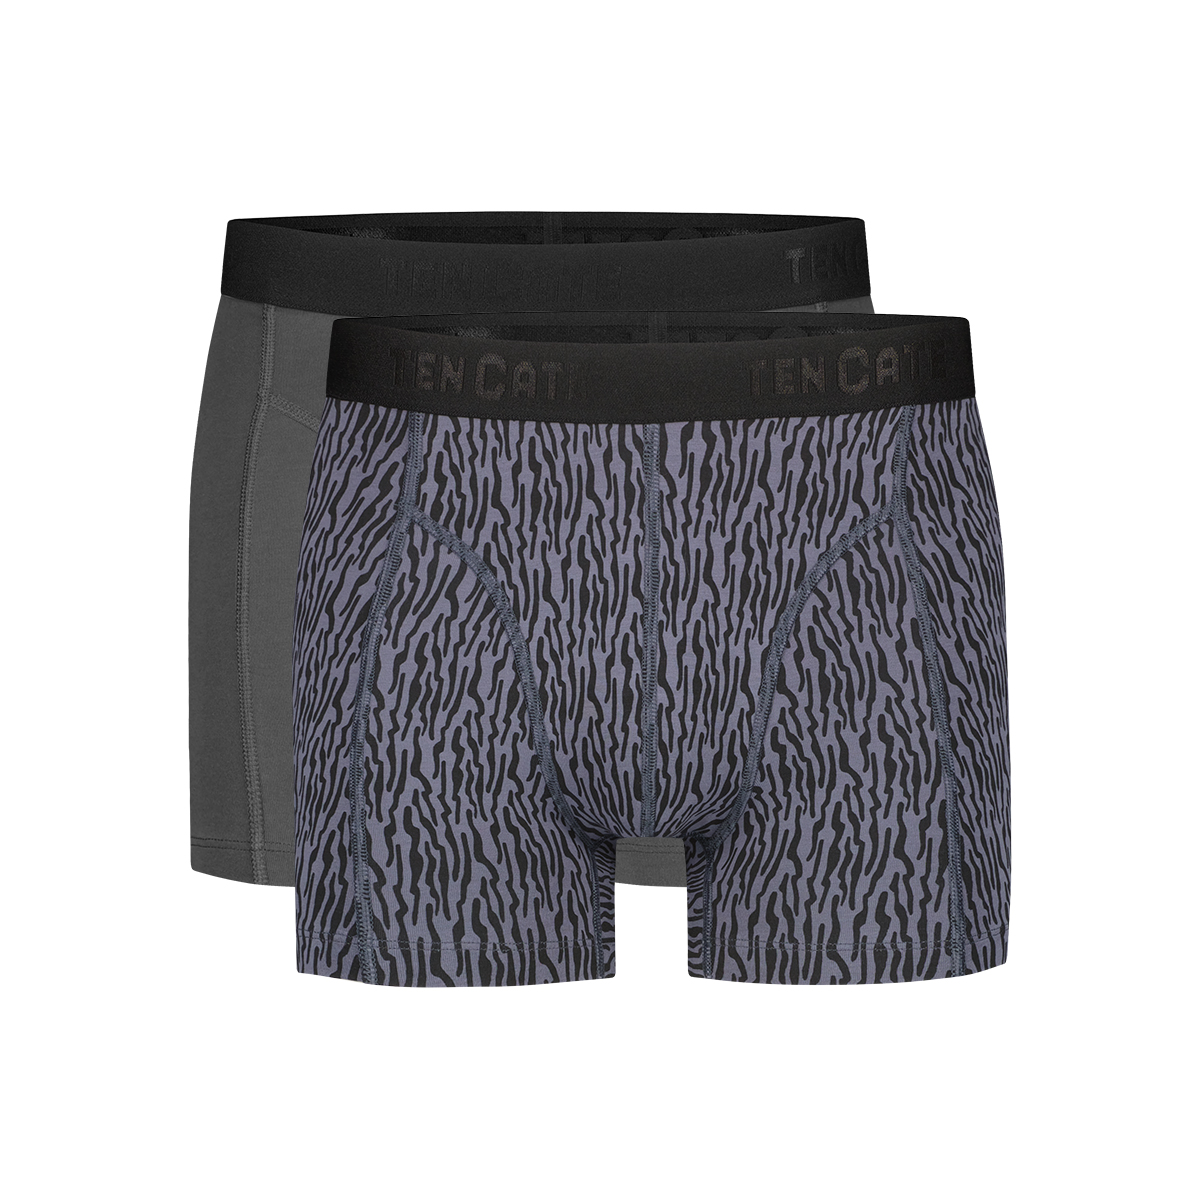 shorts cool lines grey 2 pack maat L